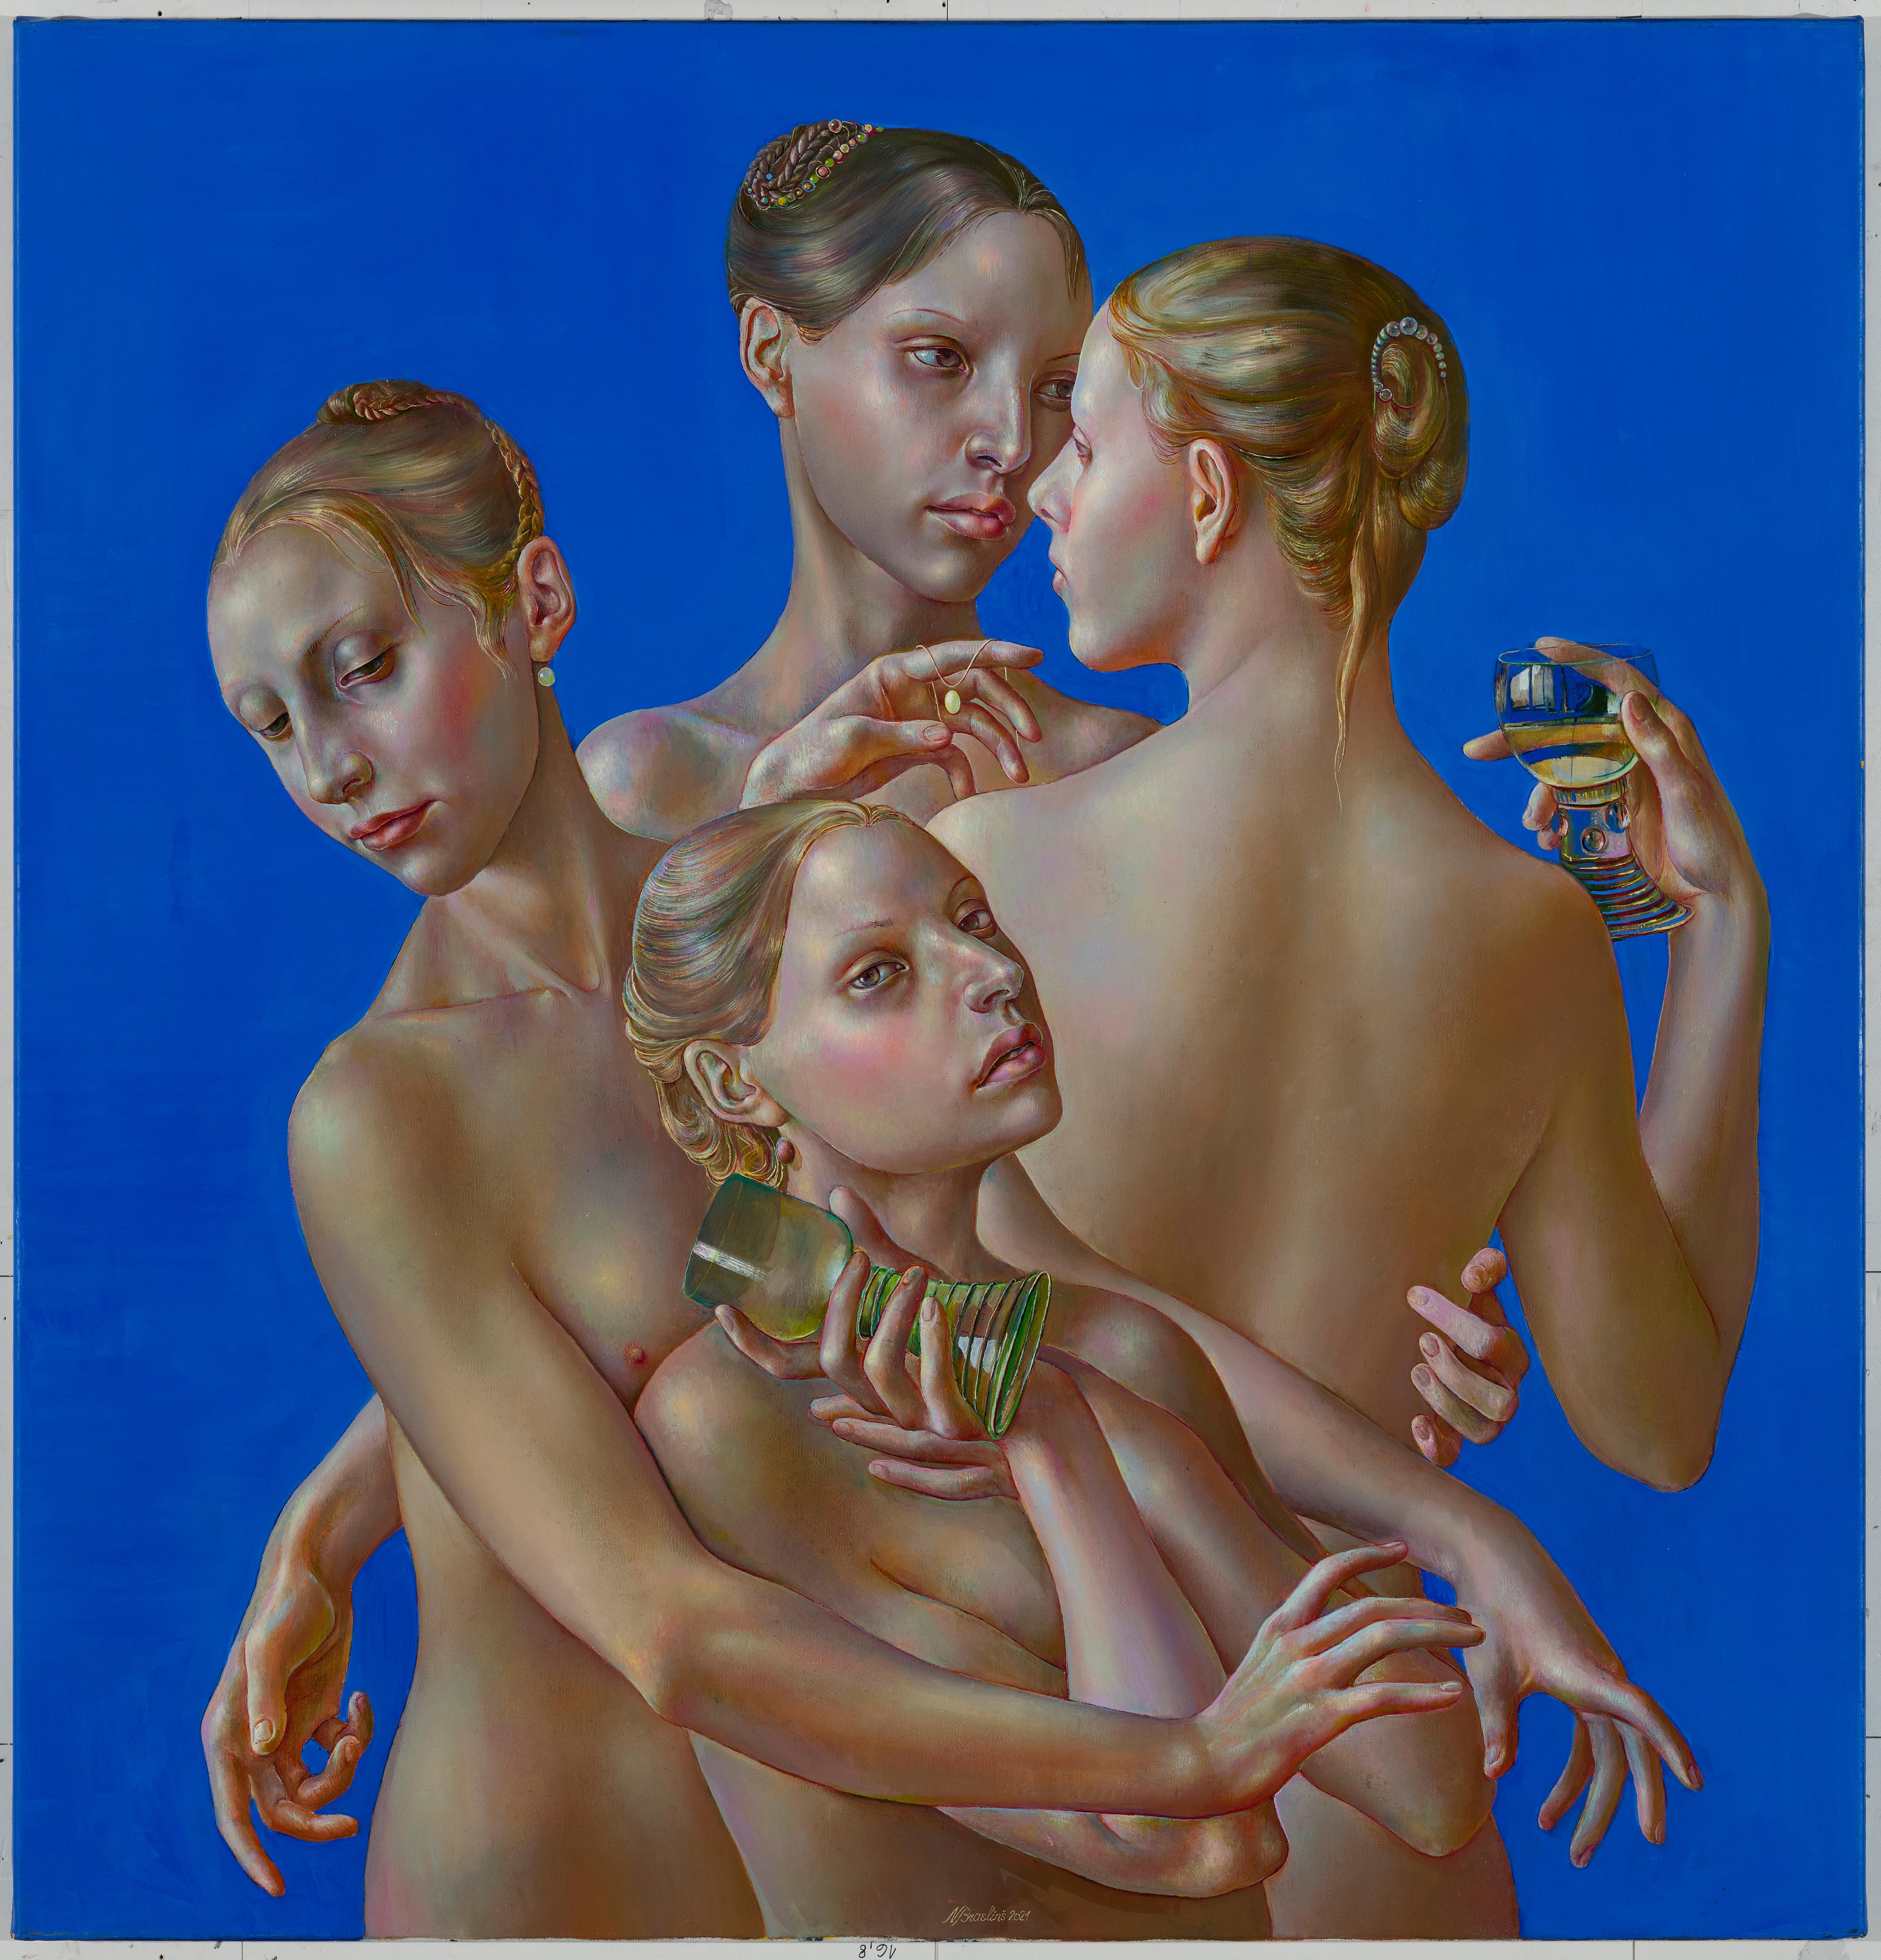 Normunds Braslinsh Nude Painting - Girls and vine. 2021. Oil on canvas, 82x79 cm